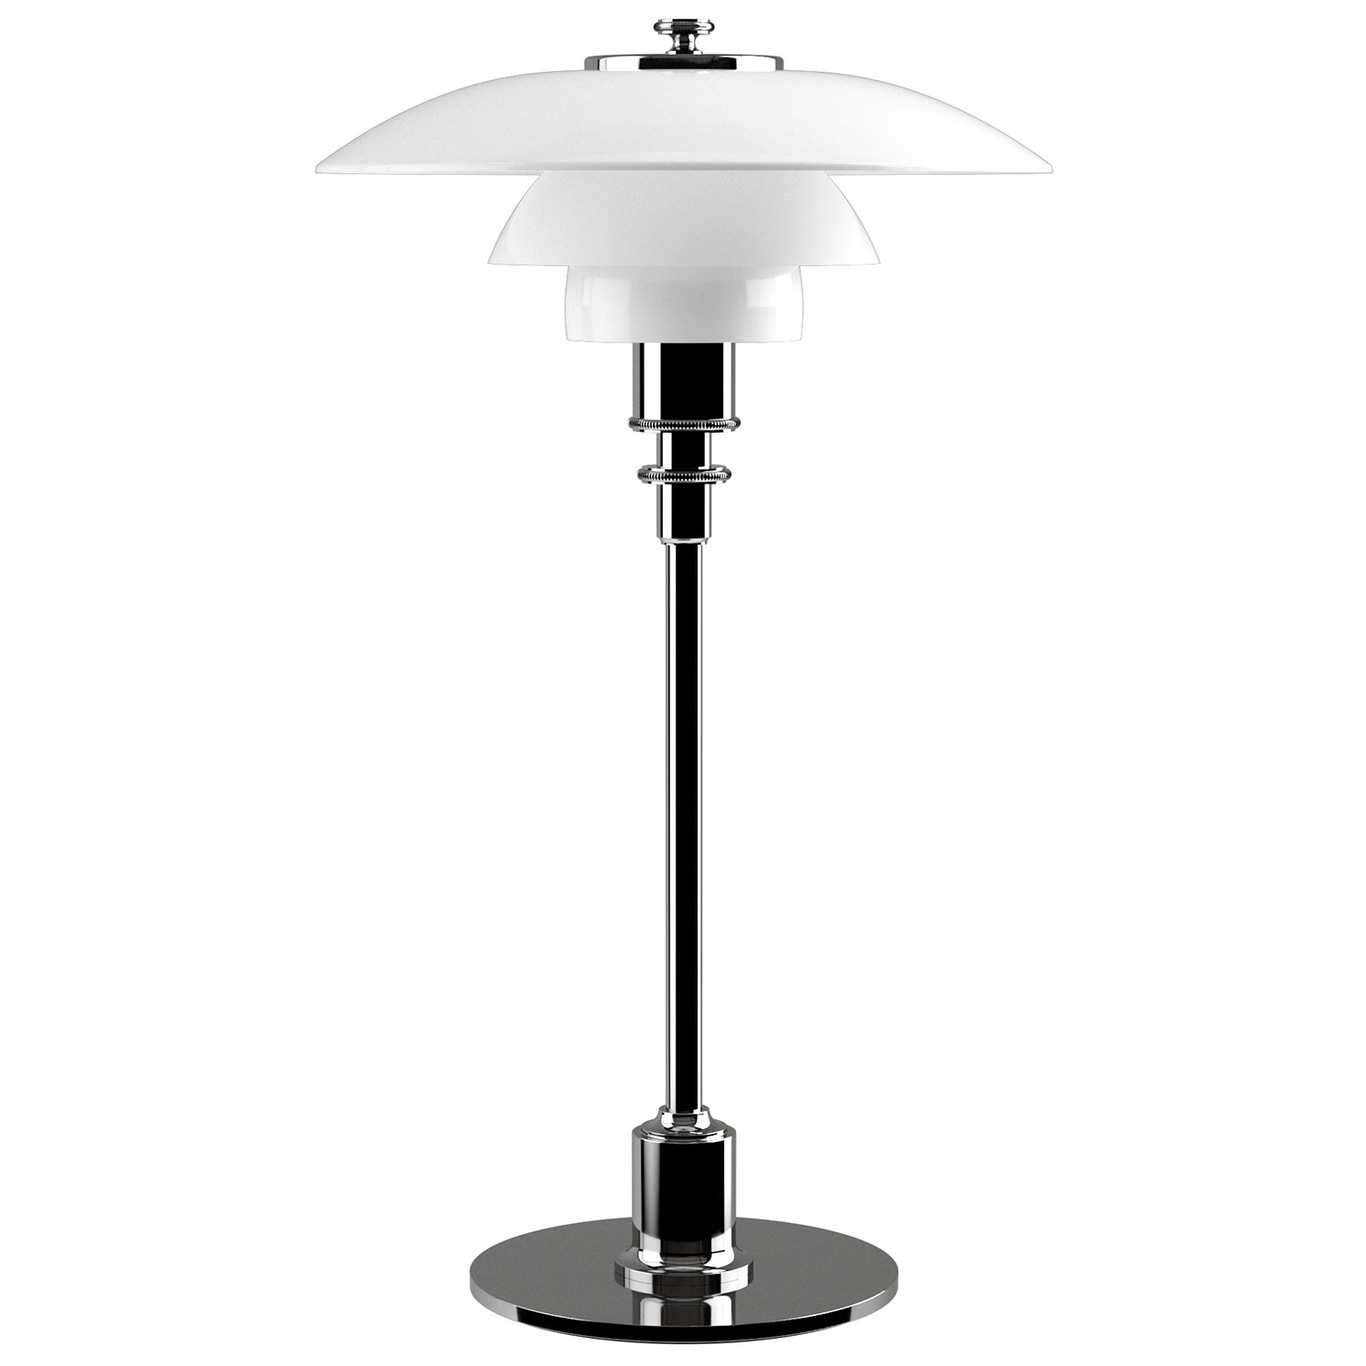 PH 3 1/2-2 1/2 Table Lamp, White Opal Glass/Chrome Plated